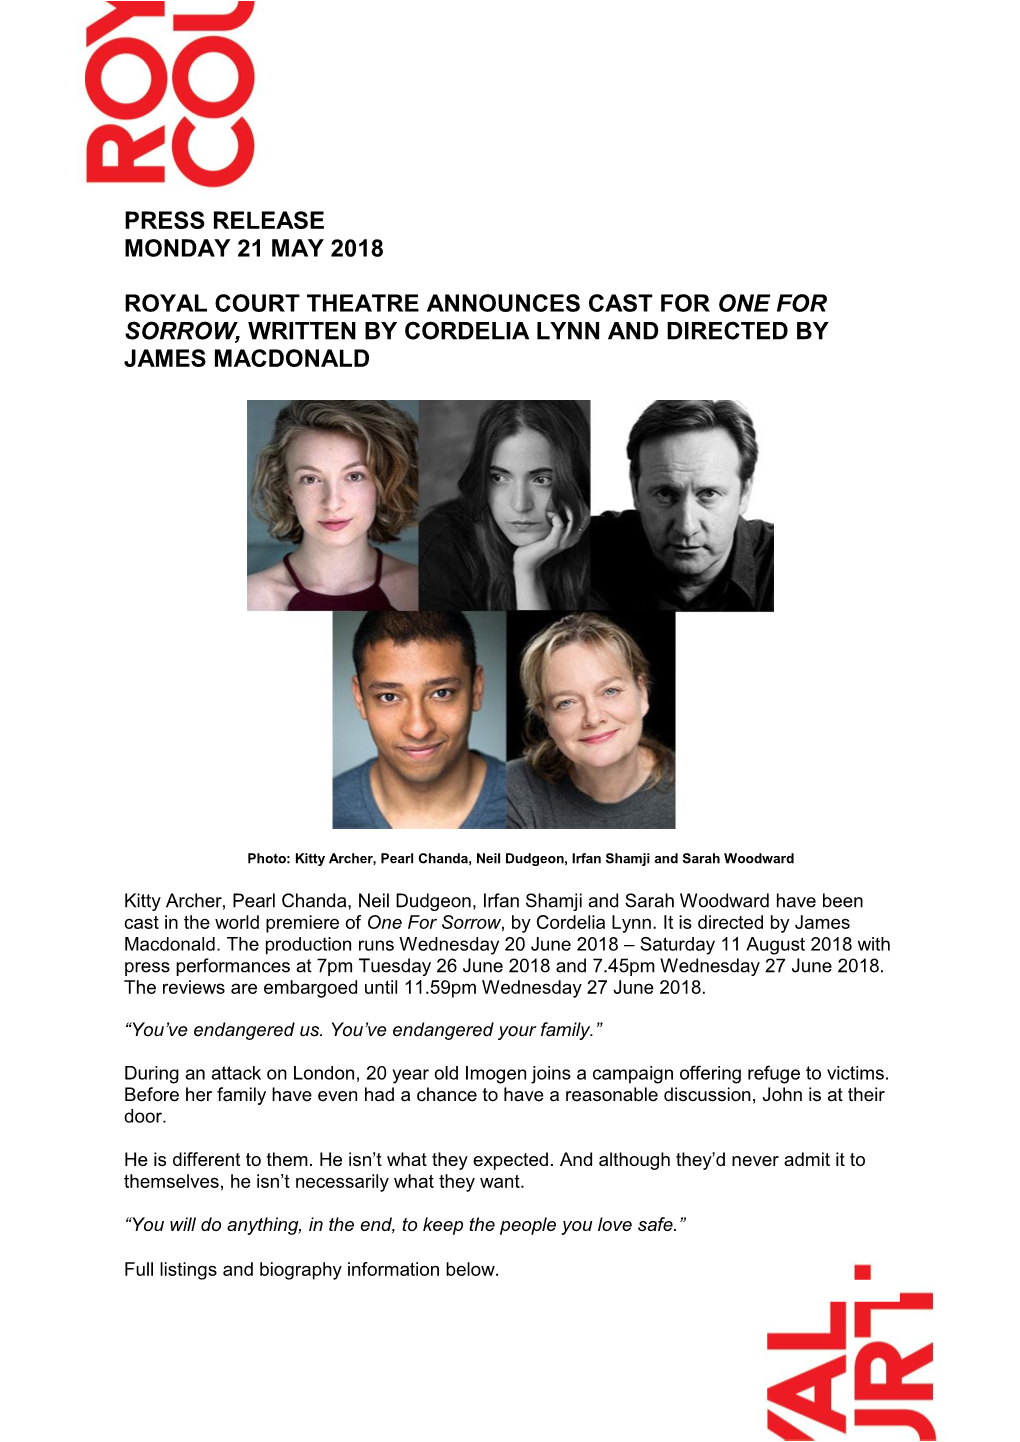 Press Release Monday 21 May 2018 Royal Court Theatre